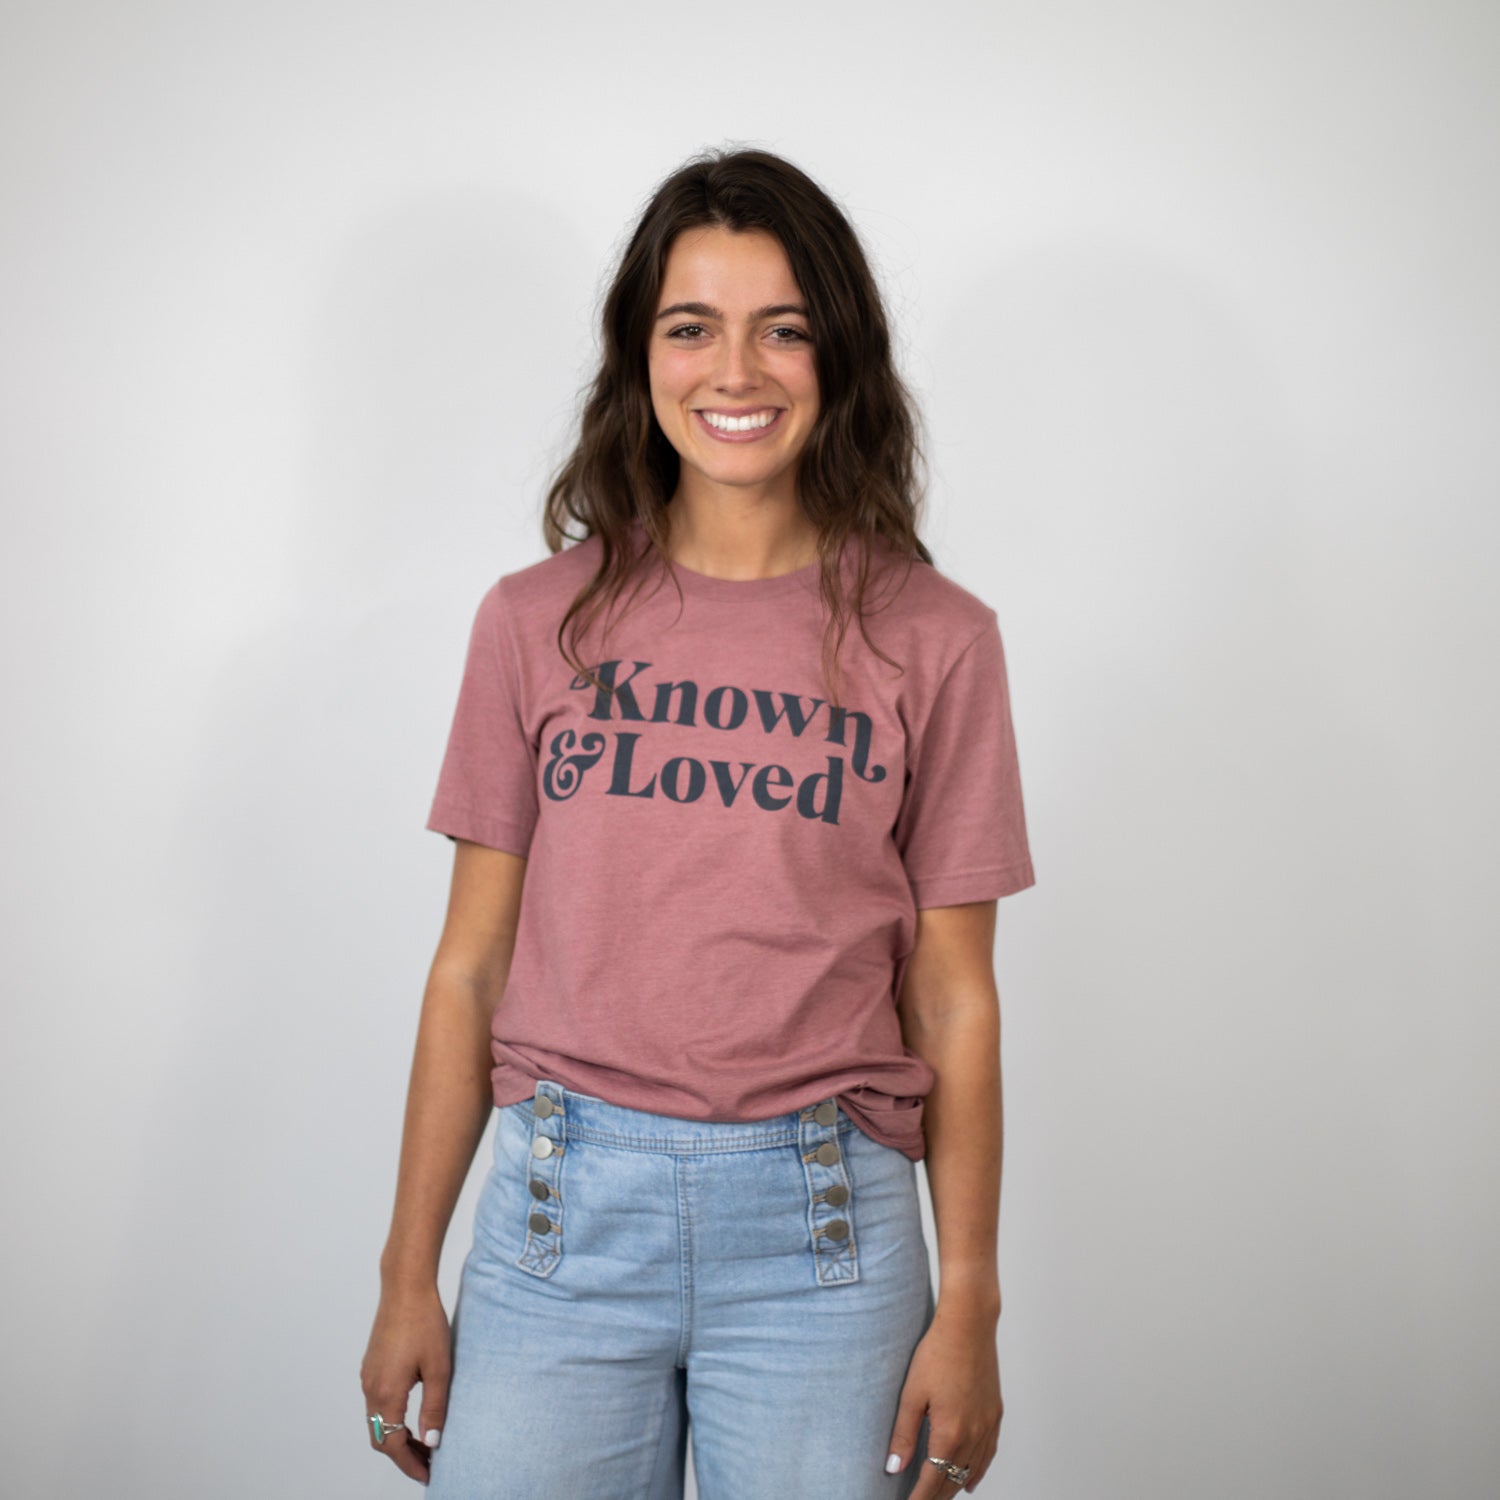 Known & Loved T-Shirt